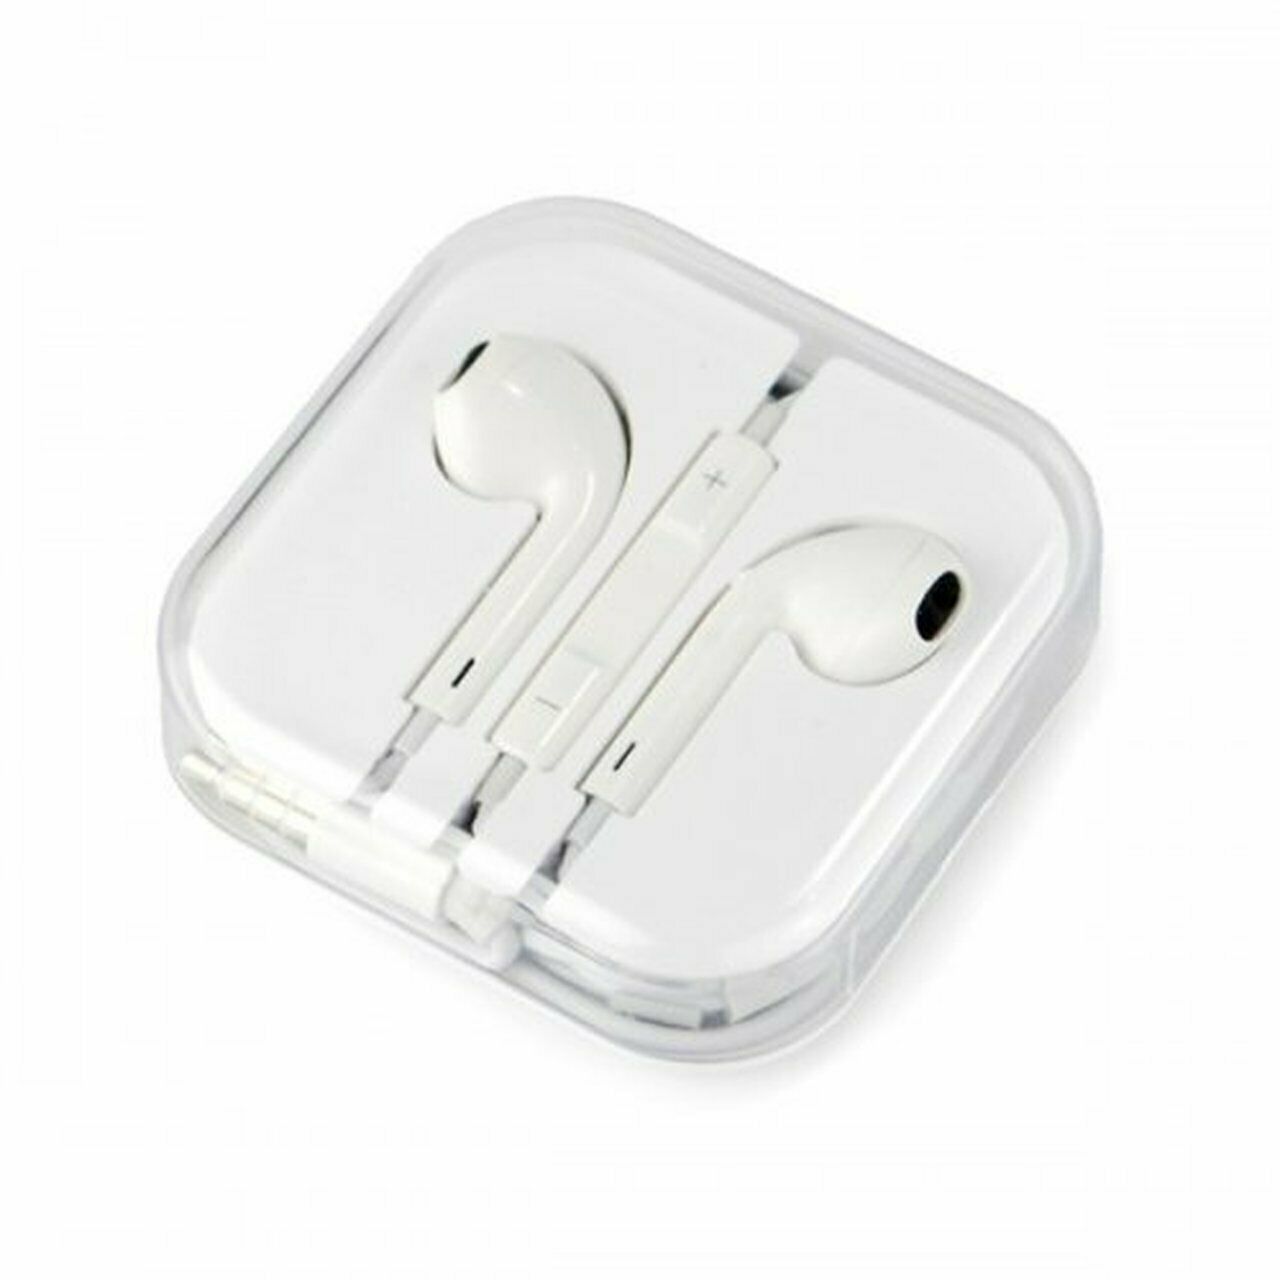 High quality bass Earphones For Apple iP